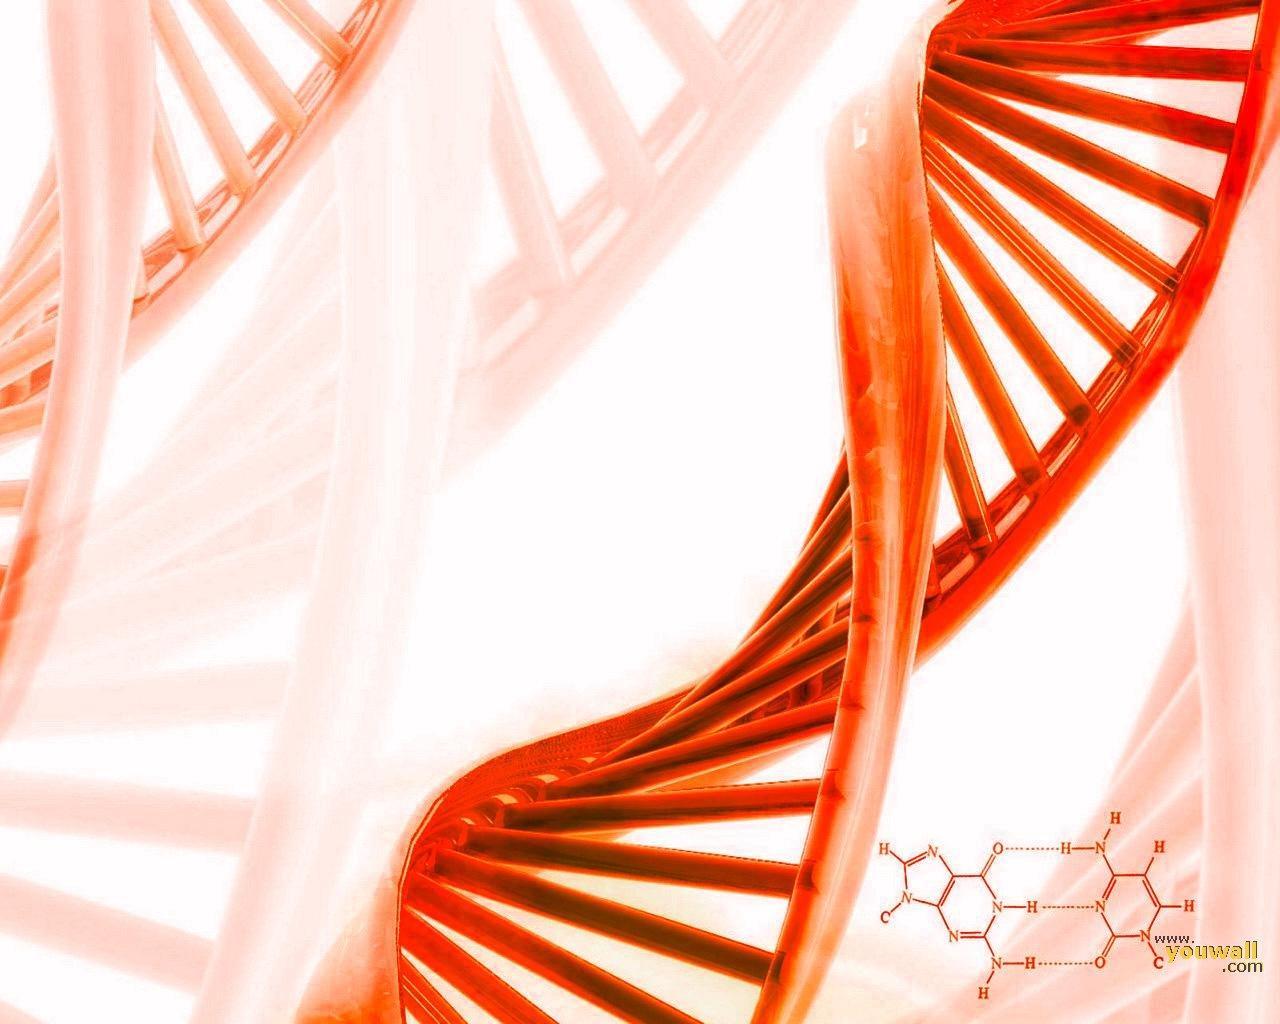 Dna Live Wallpaper for Android